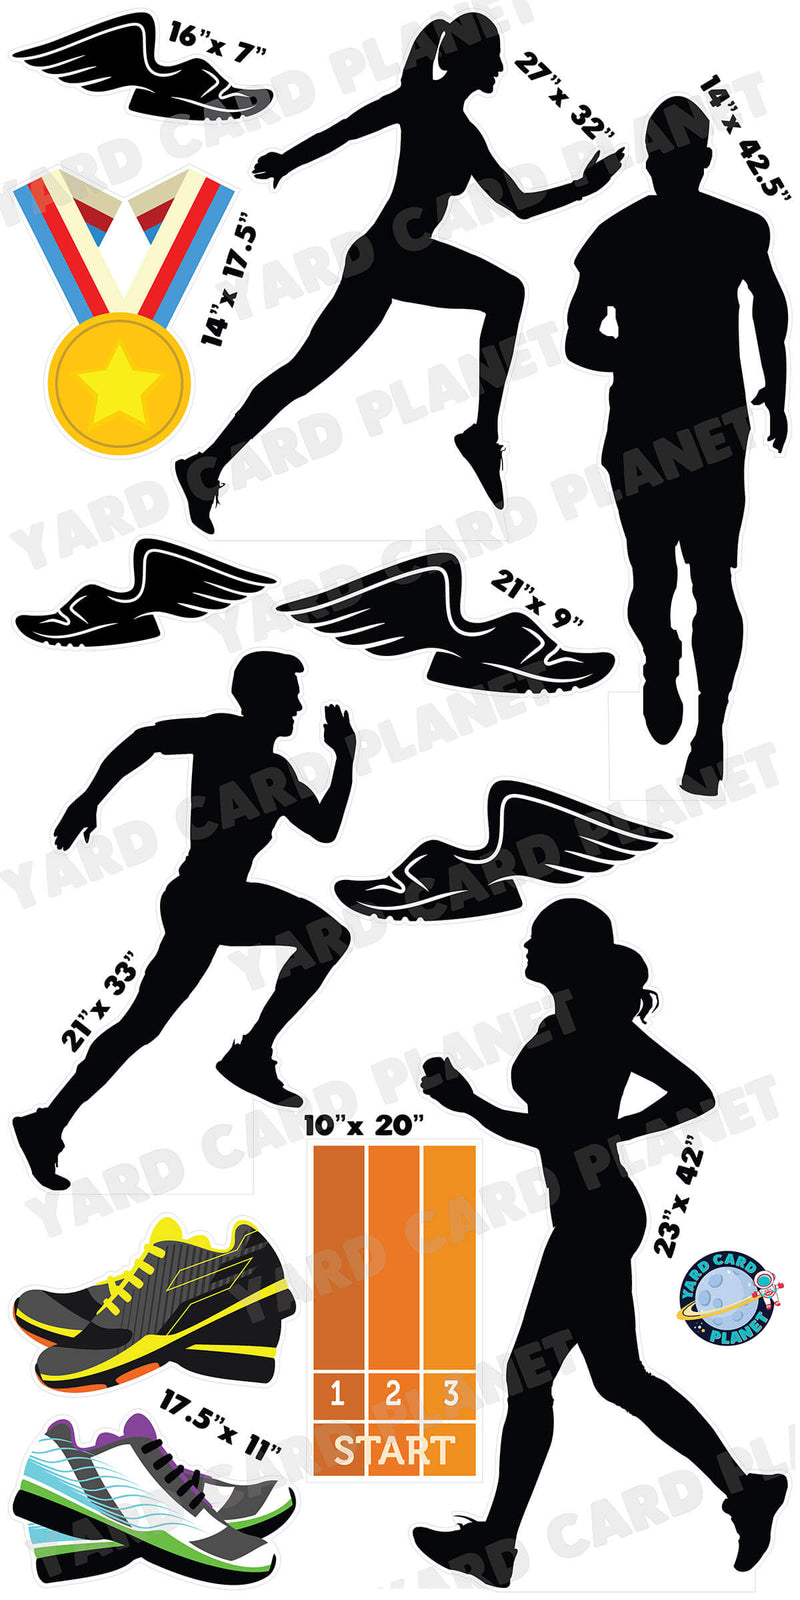 Running and Track Silhouette Yard Card Flair Set with Measurements